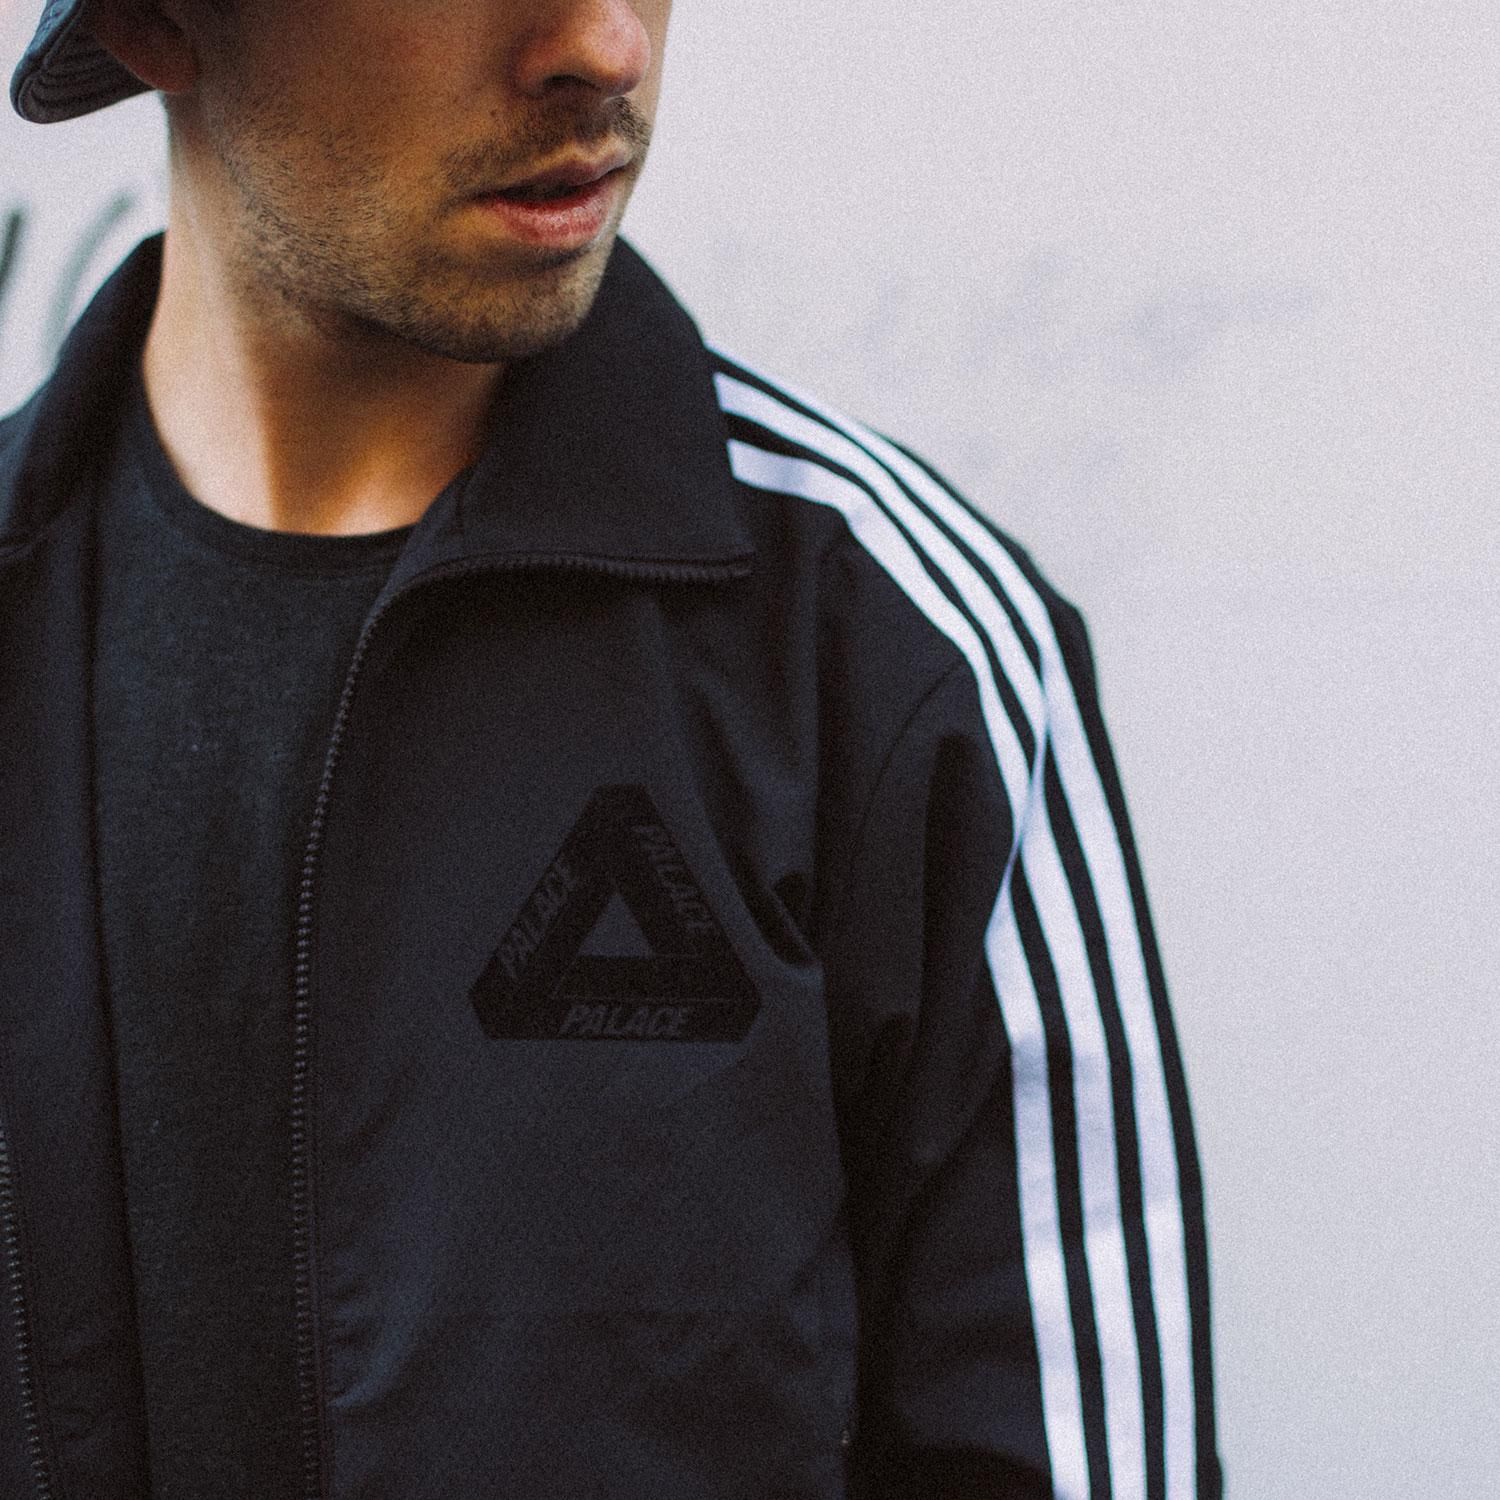 Galaxy Blive kold ler Palace Skateboards X adidas Originals Collection - Available on ONE BLOCK  DOWN